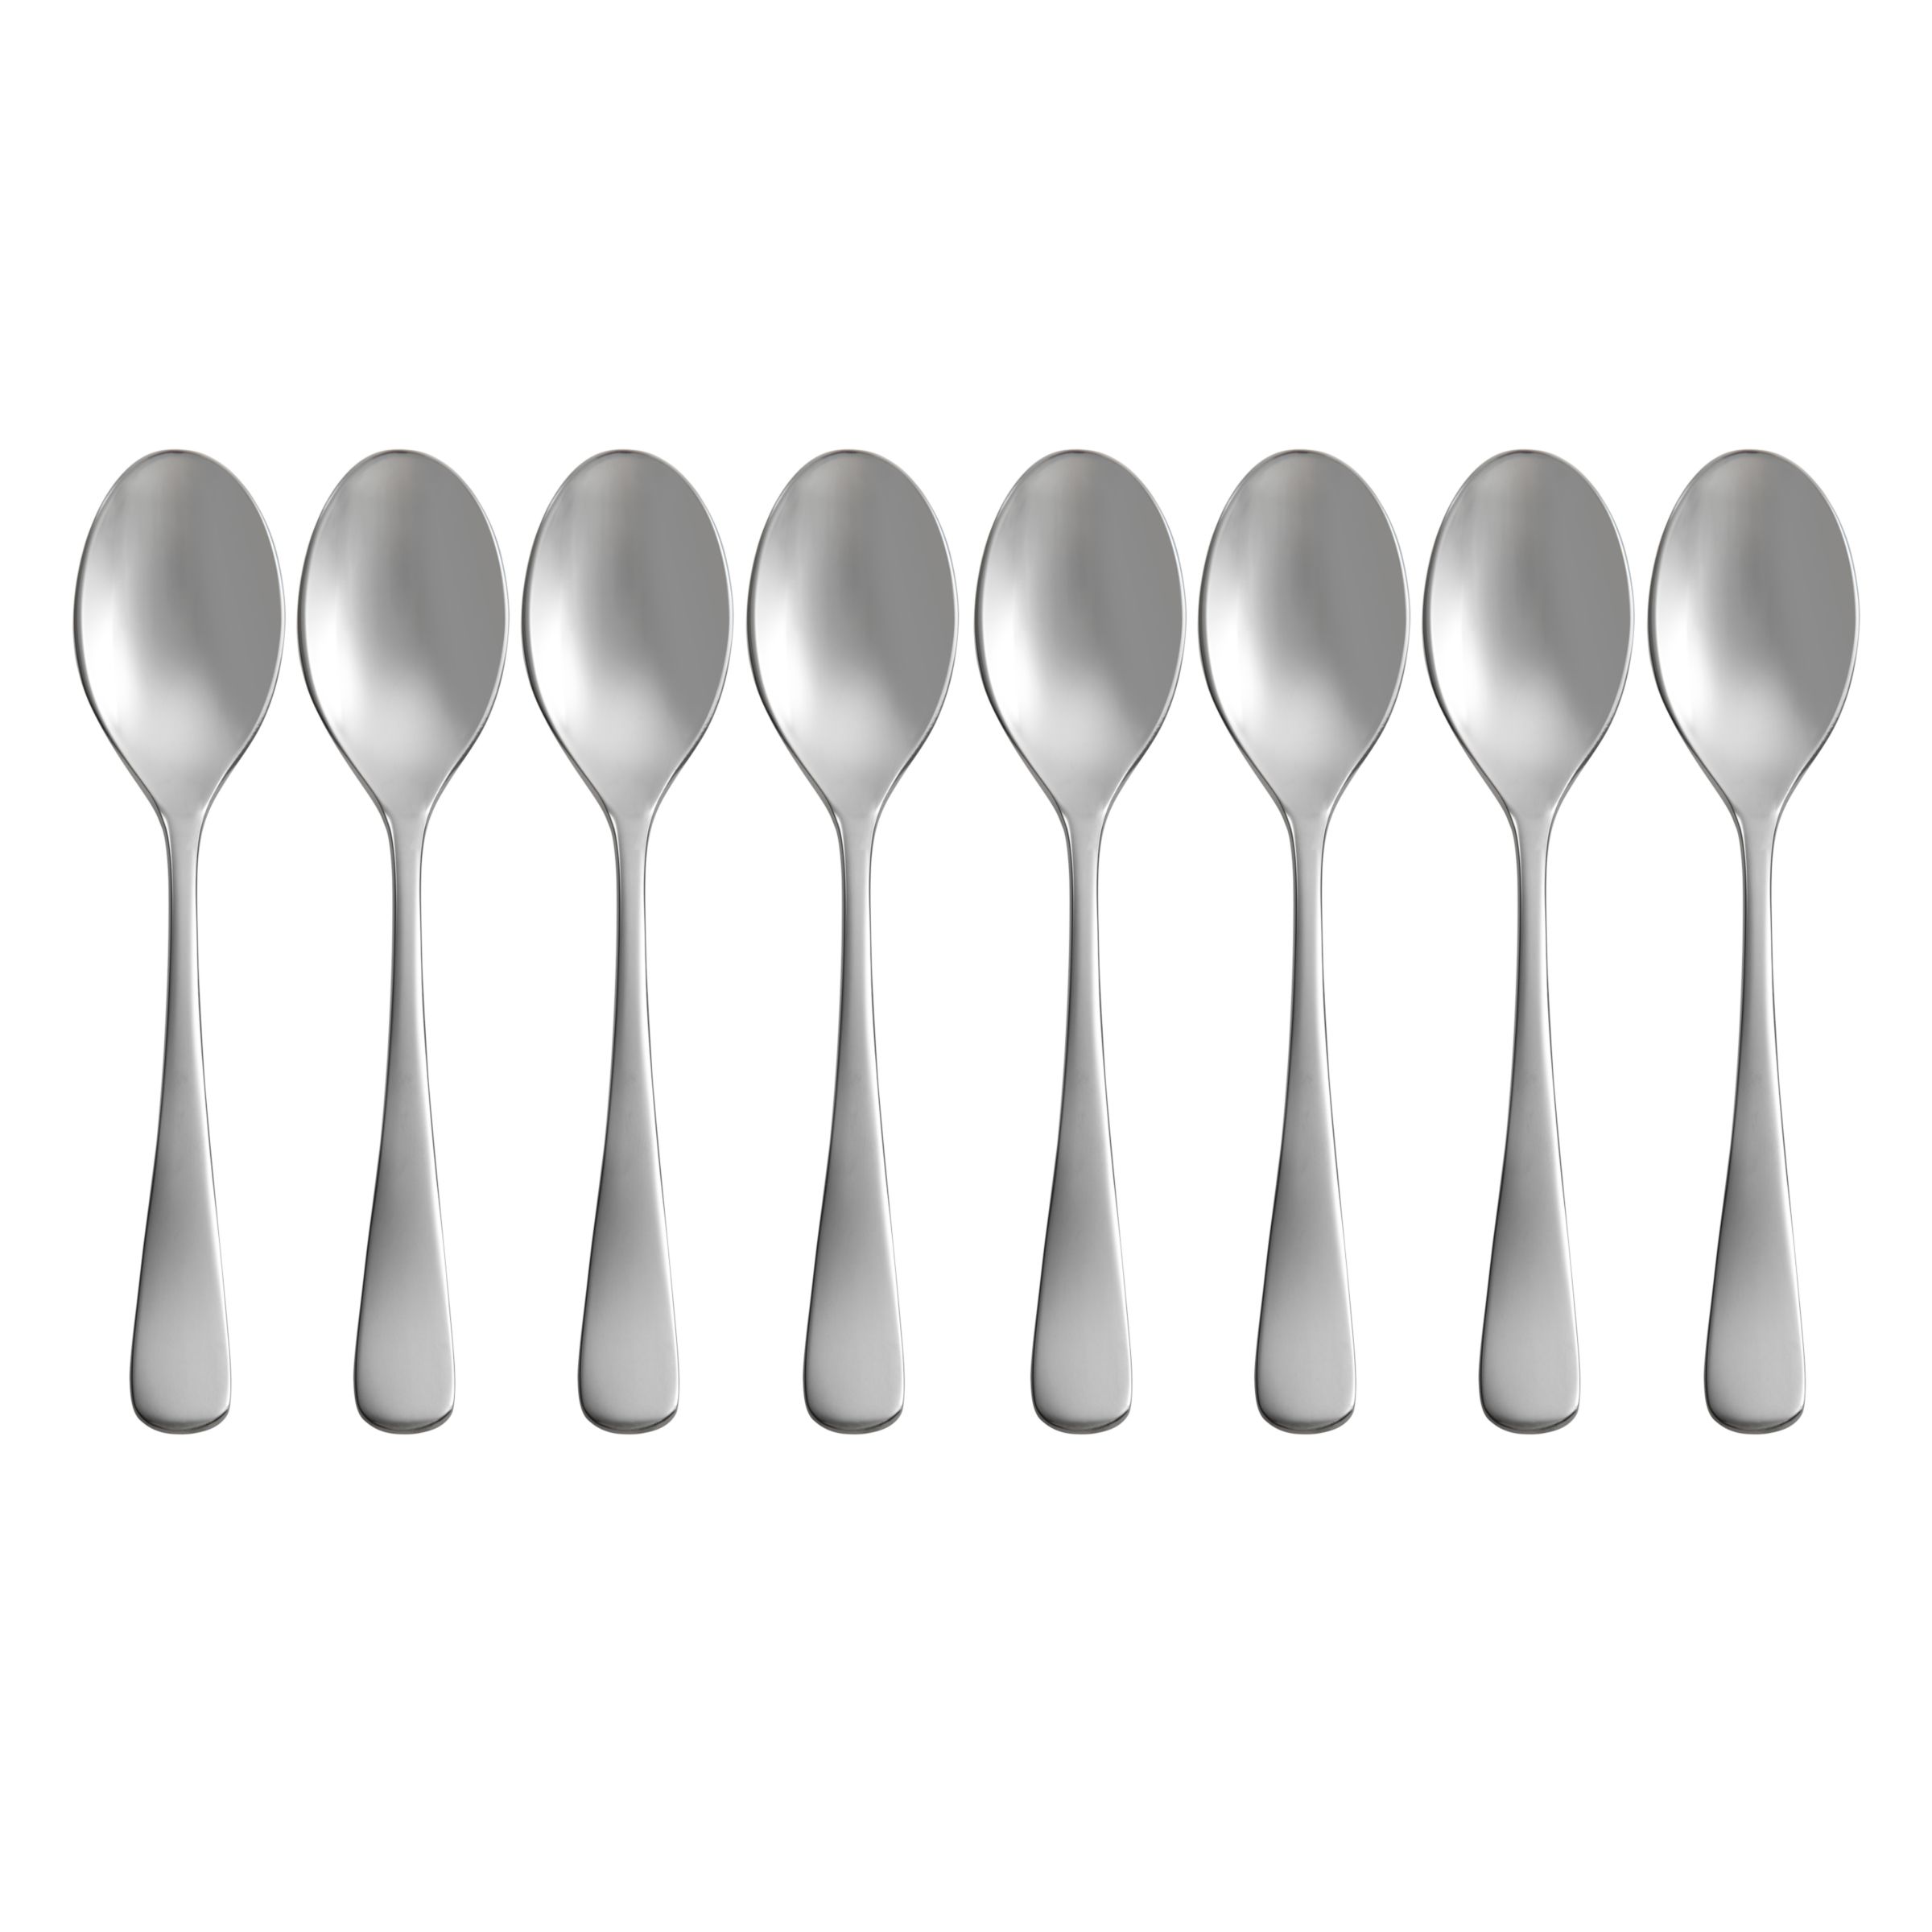 Radford Coffee Spoons, Stainless